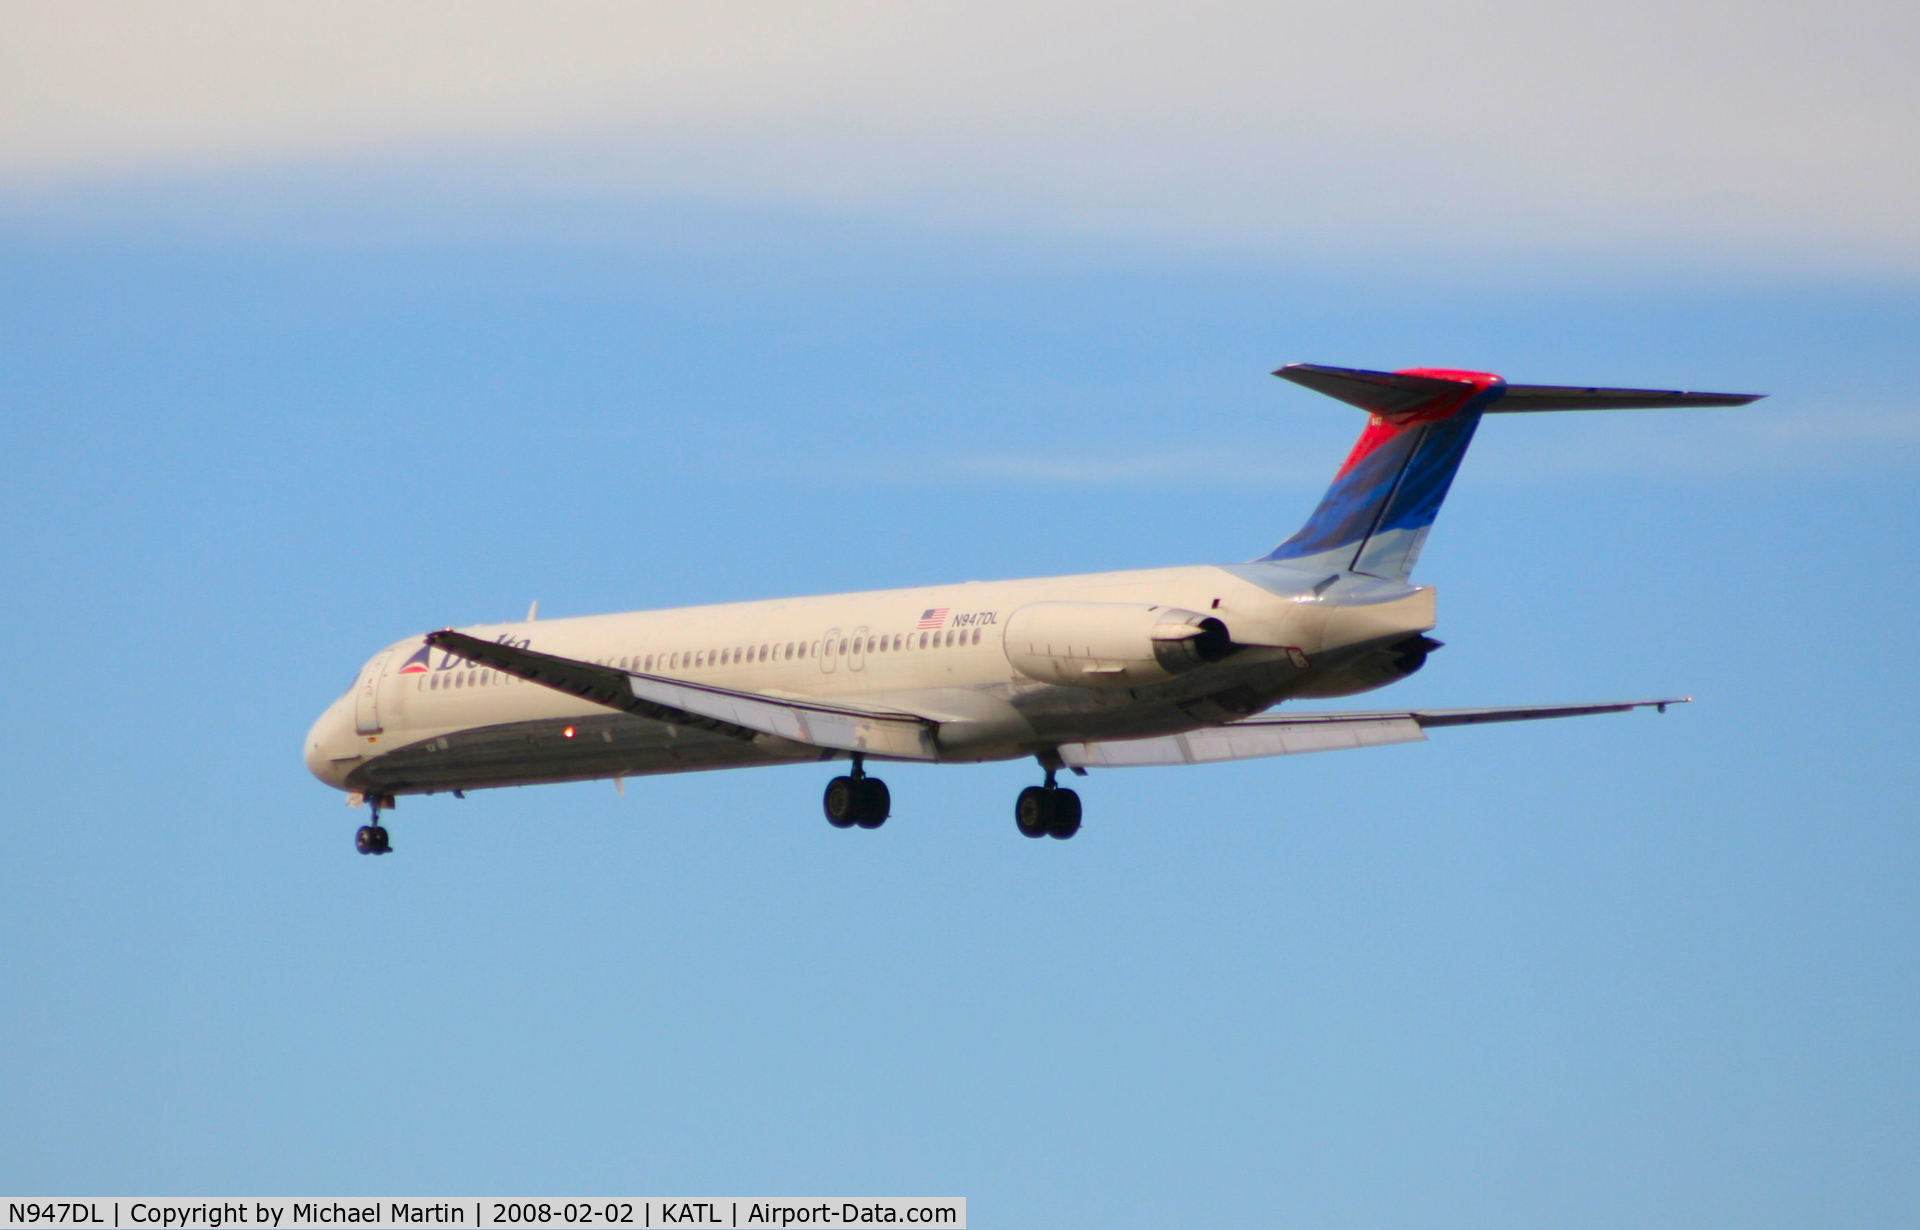 N947DL, 1989 McDonnell Douglas MD-88 C/N 49878, Over the numbers of 26R